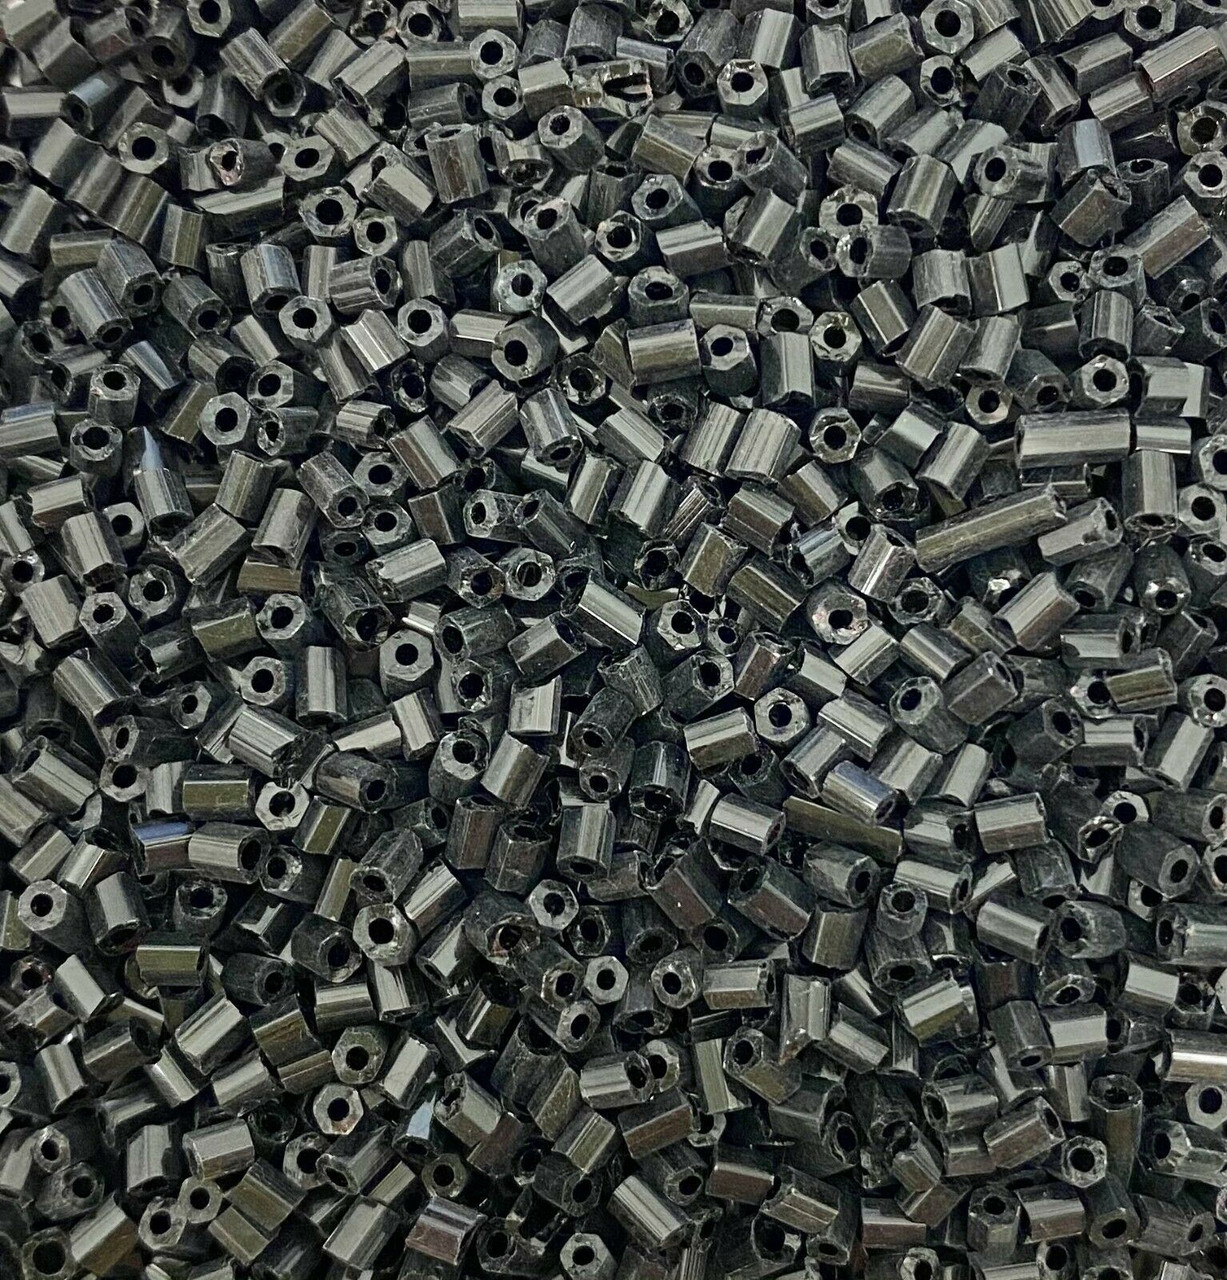 50g glass HEX seed beads - Black Opaque - size 11/0 (approx 2mm)